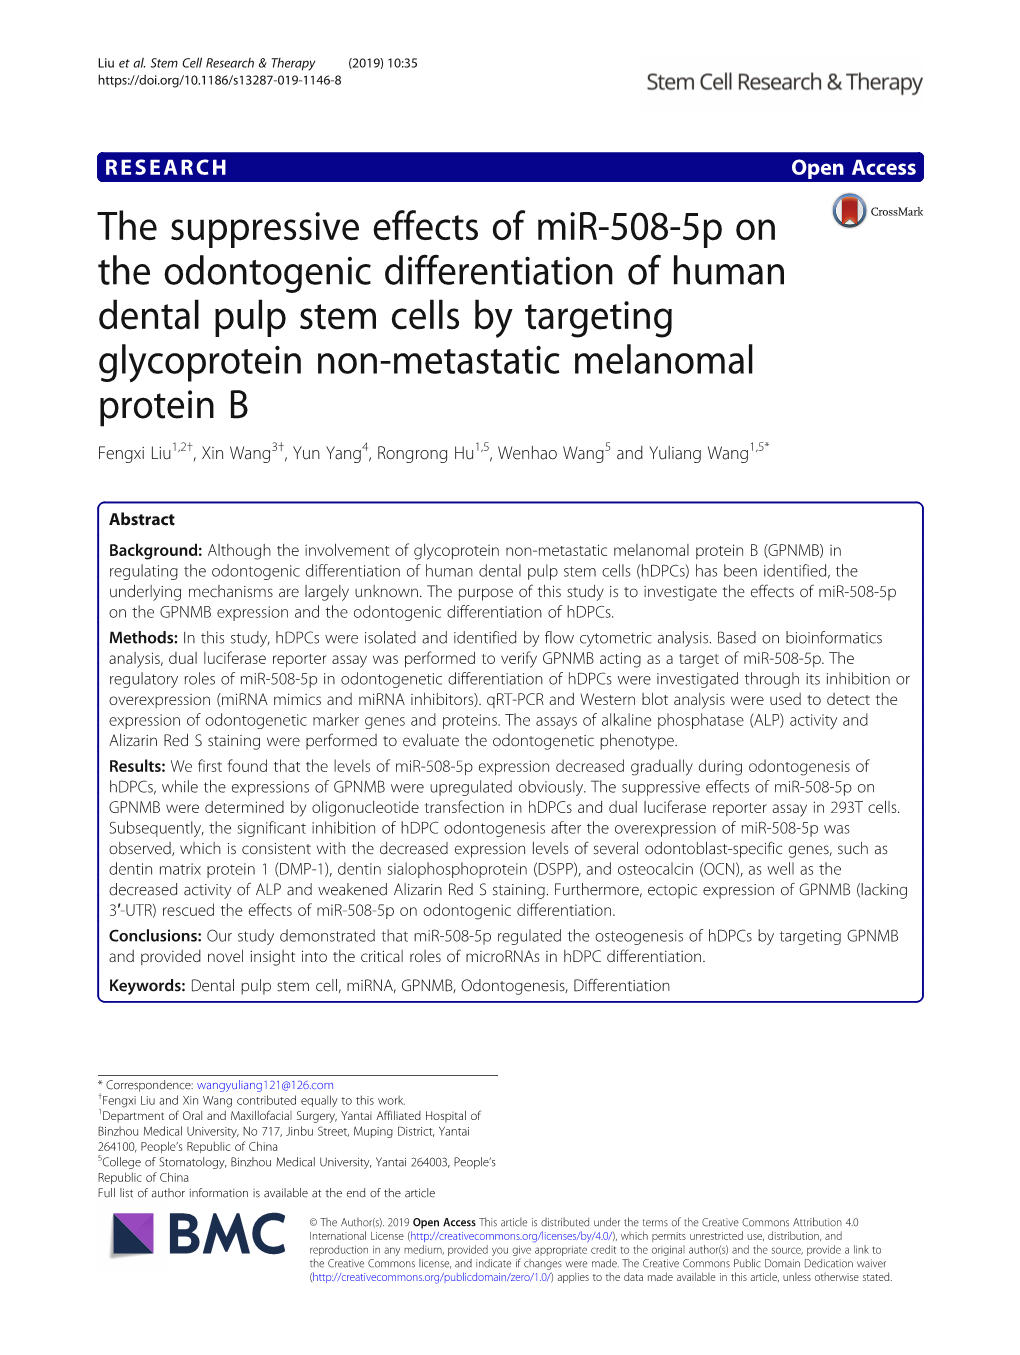 The Suppressive Effects of Mir-508-5P on the Odontogenic